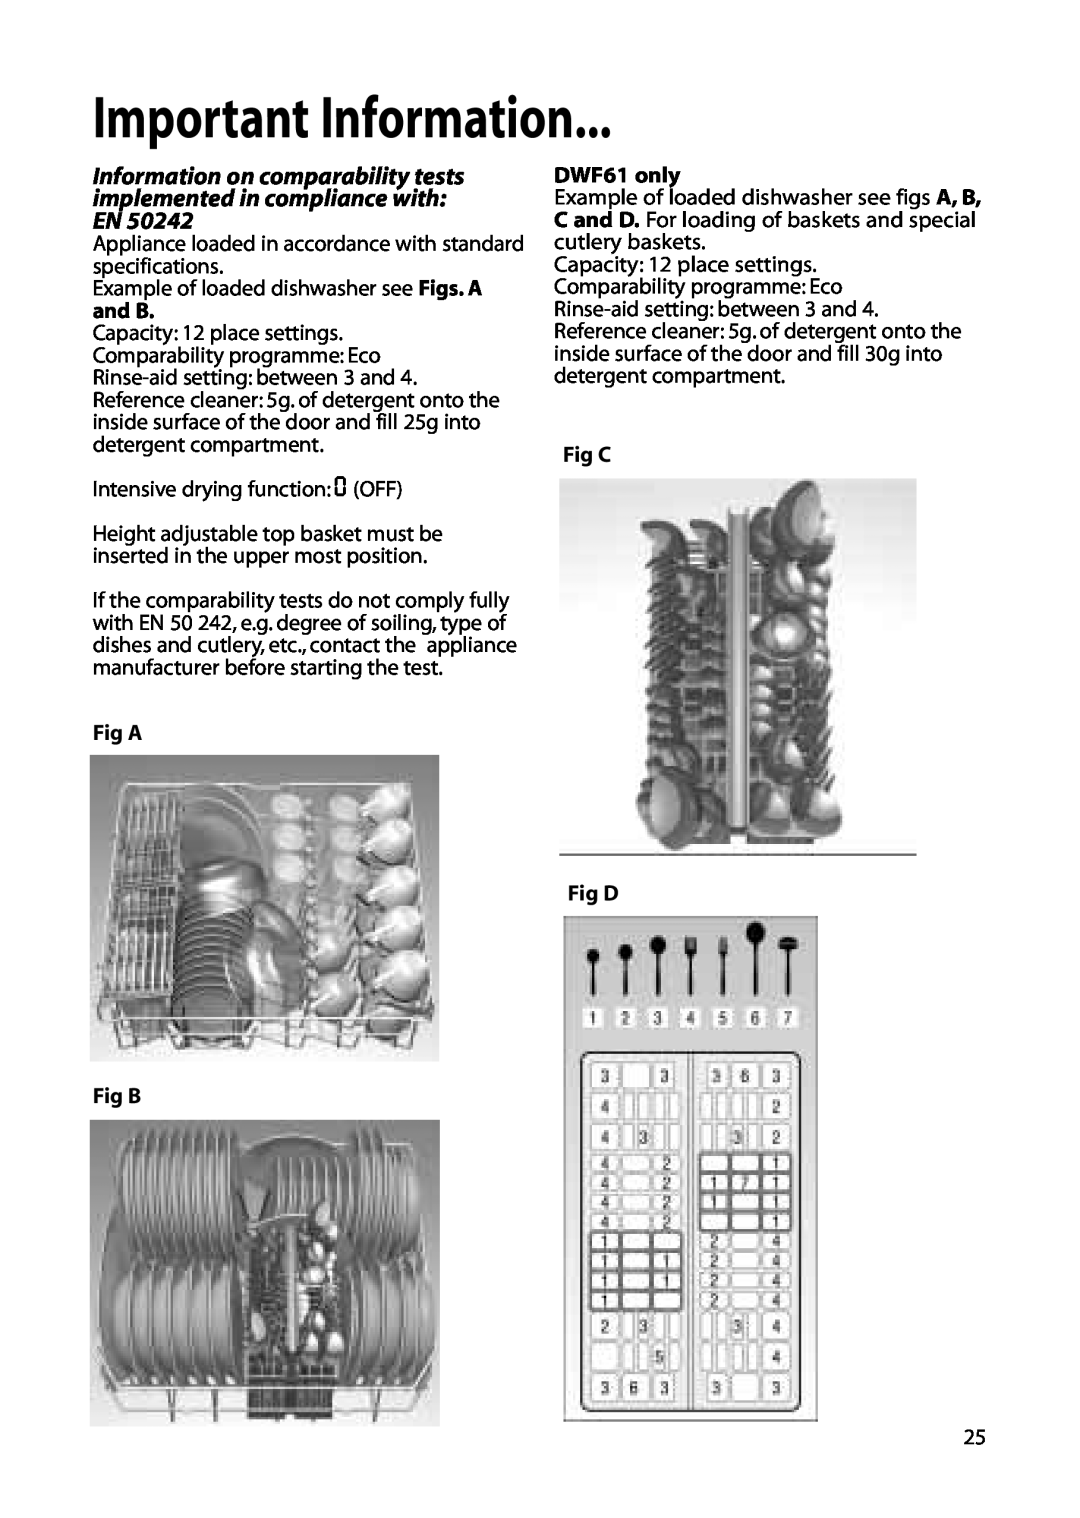 Hotpoint DWF60 installation instructions Important Information, DWF61 only, Fig C, Fig A Fig D Fig B 